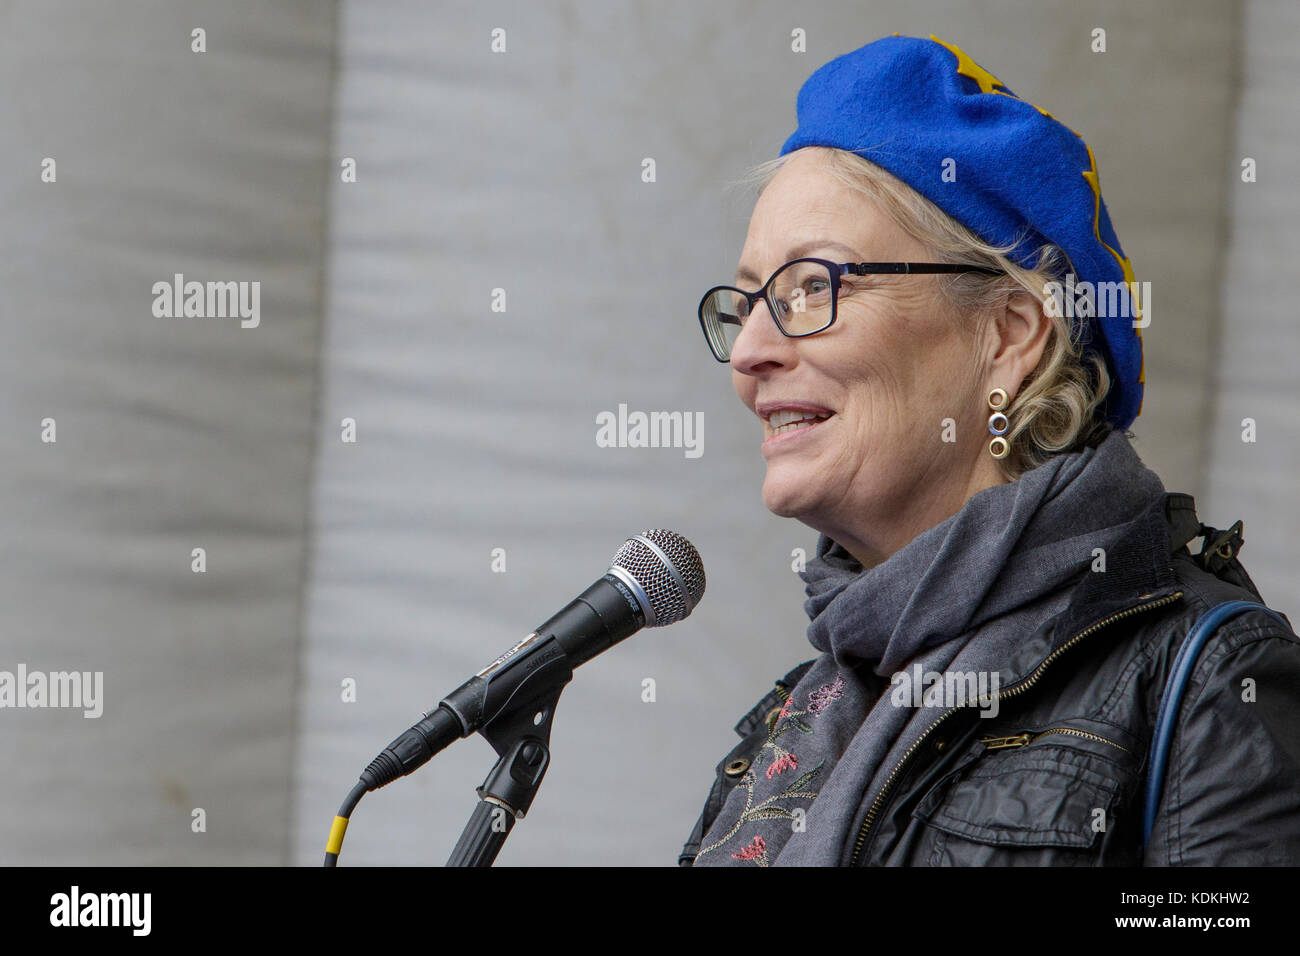 Bristol, UK. 14th Oct, 2017. Julie Girling, Conservative MEP for South West England & Gibraltar is pictured as she talks to Pro EU supporters at an anti Brexit rally in College Green. The rally was held to allow people to show their support for the UK remaining part of the European Union and to celebrate the South-West and Gibraltar European Parliament Constituency and the benefits that the region enjoys as part of the European Union. Credit: lynchpics/Alamy Live News Stock Photo